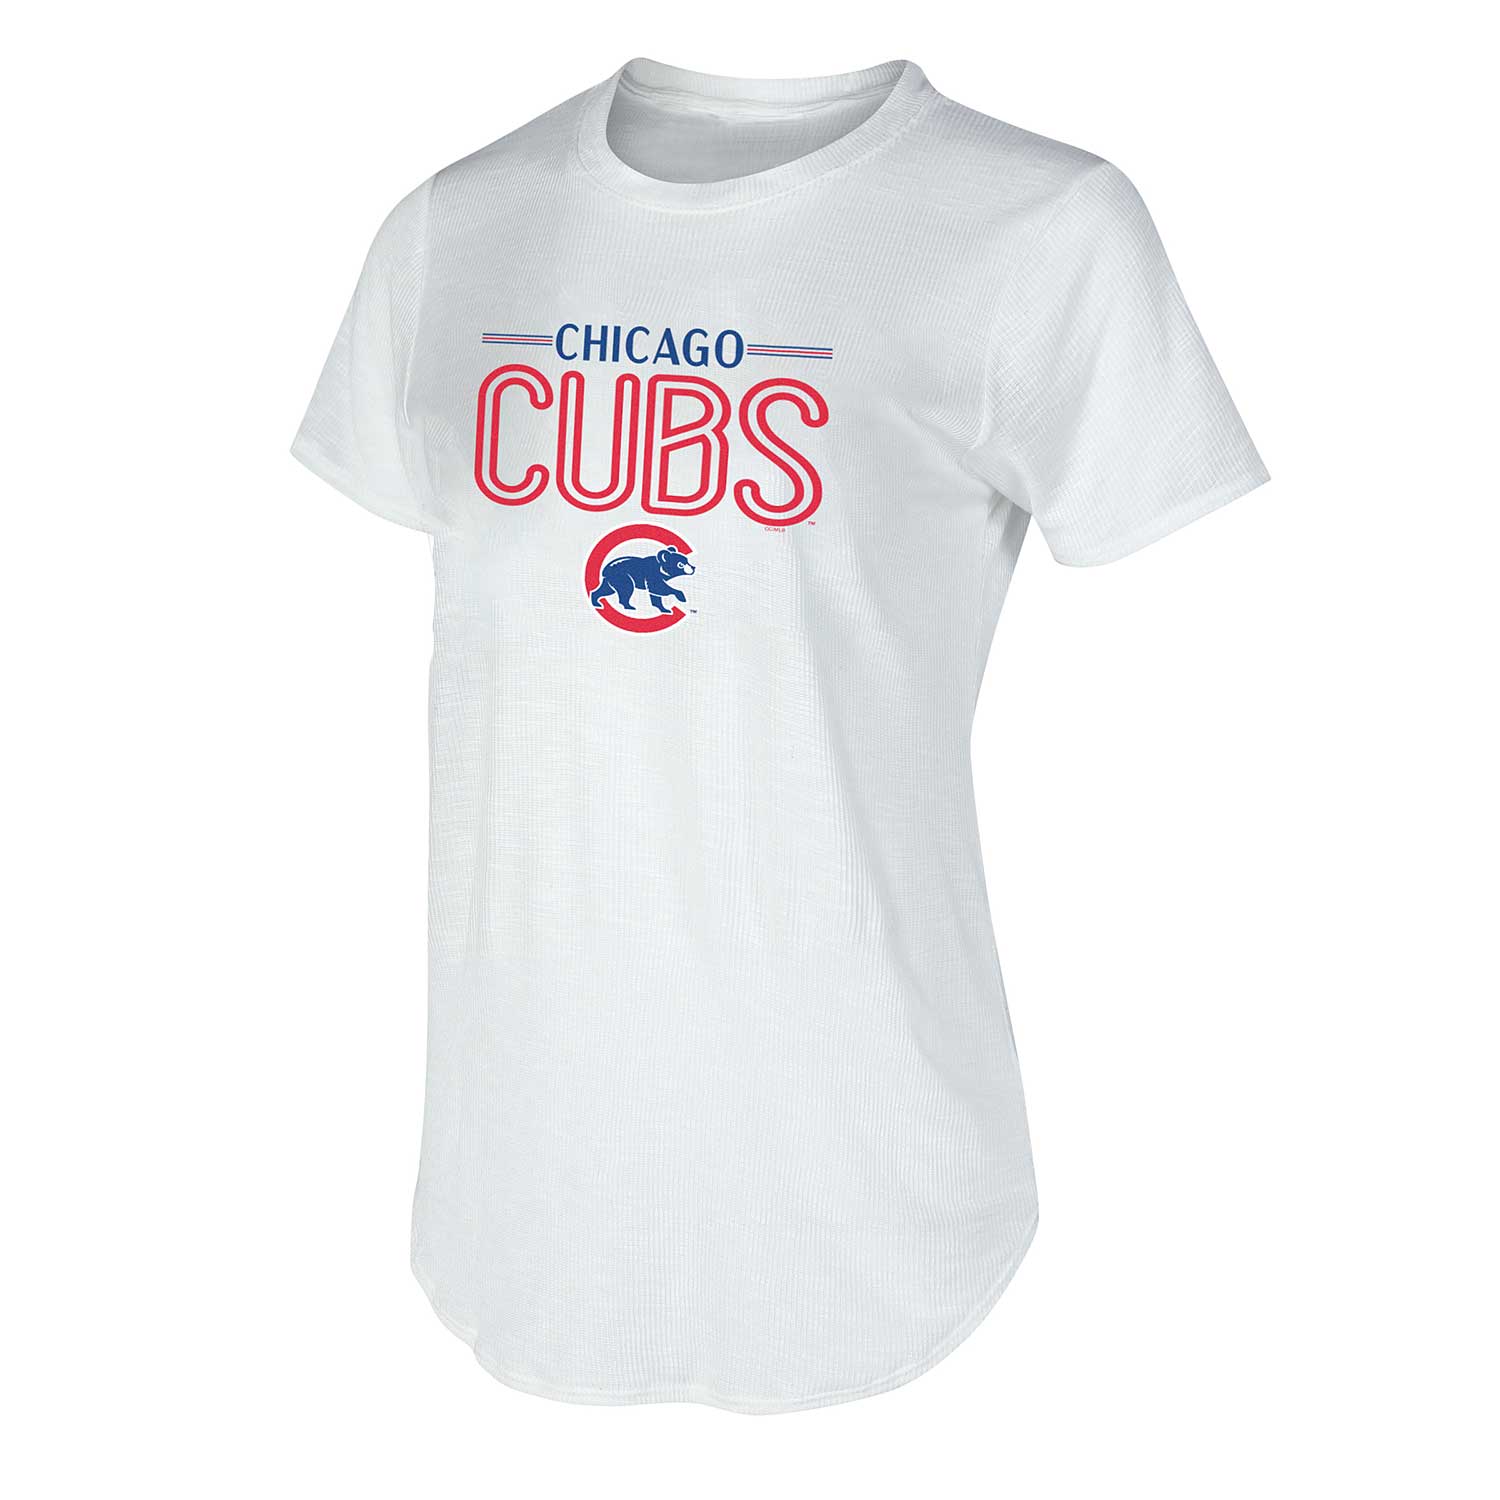 Official Women's Chicago Cubs Gear, Womens Cubs Apparel, Ladies